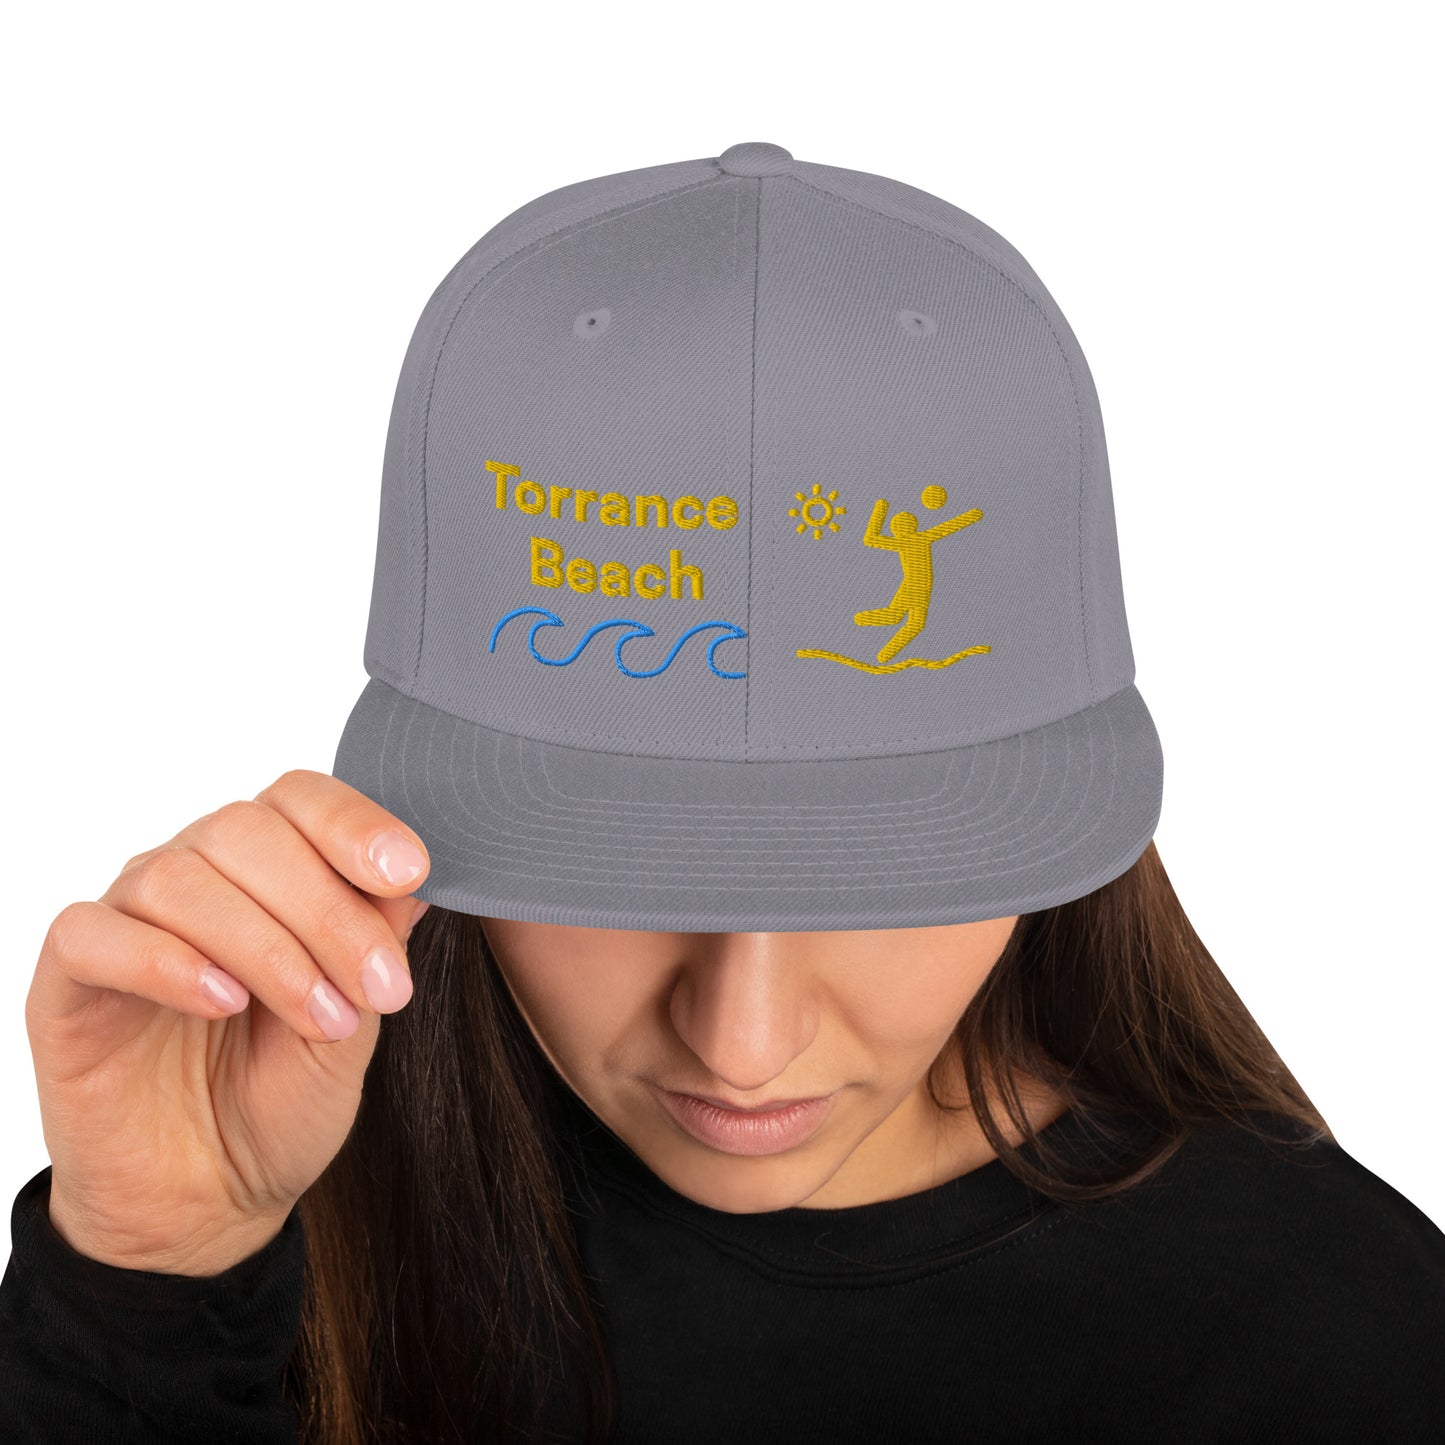 Torrance  Beach - California - South Bay - Snapback Hat - Volleyball Style